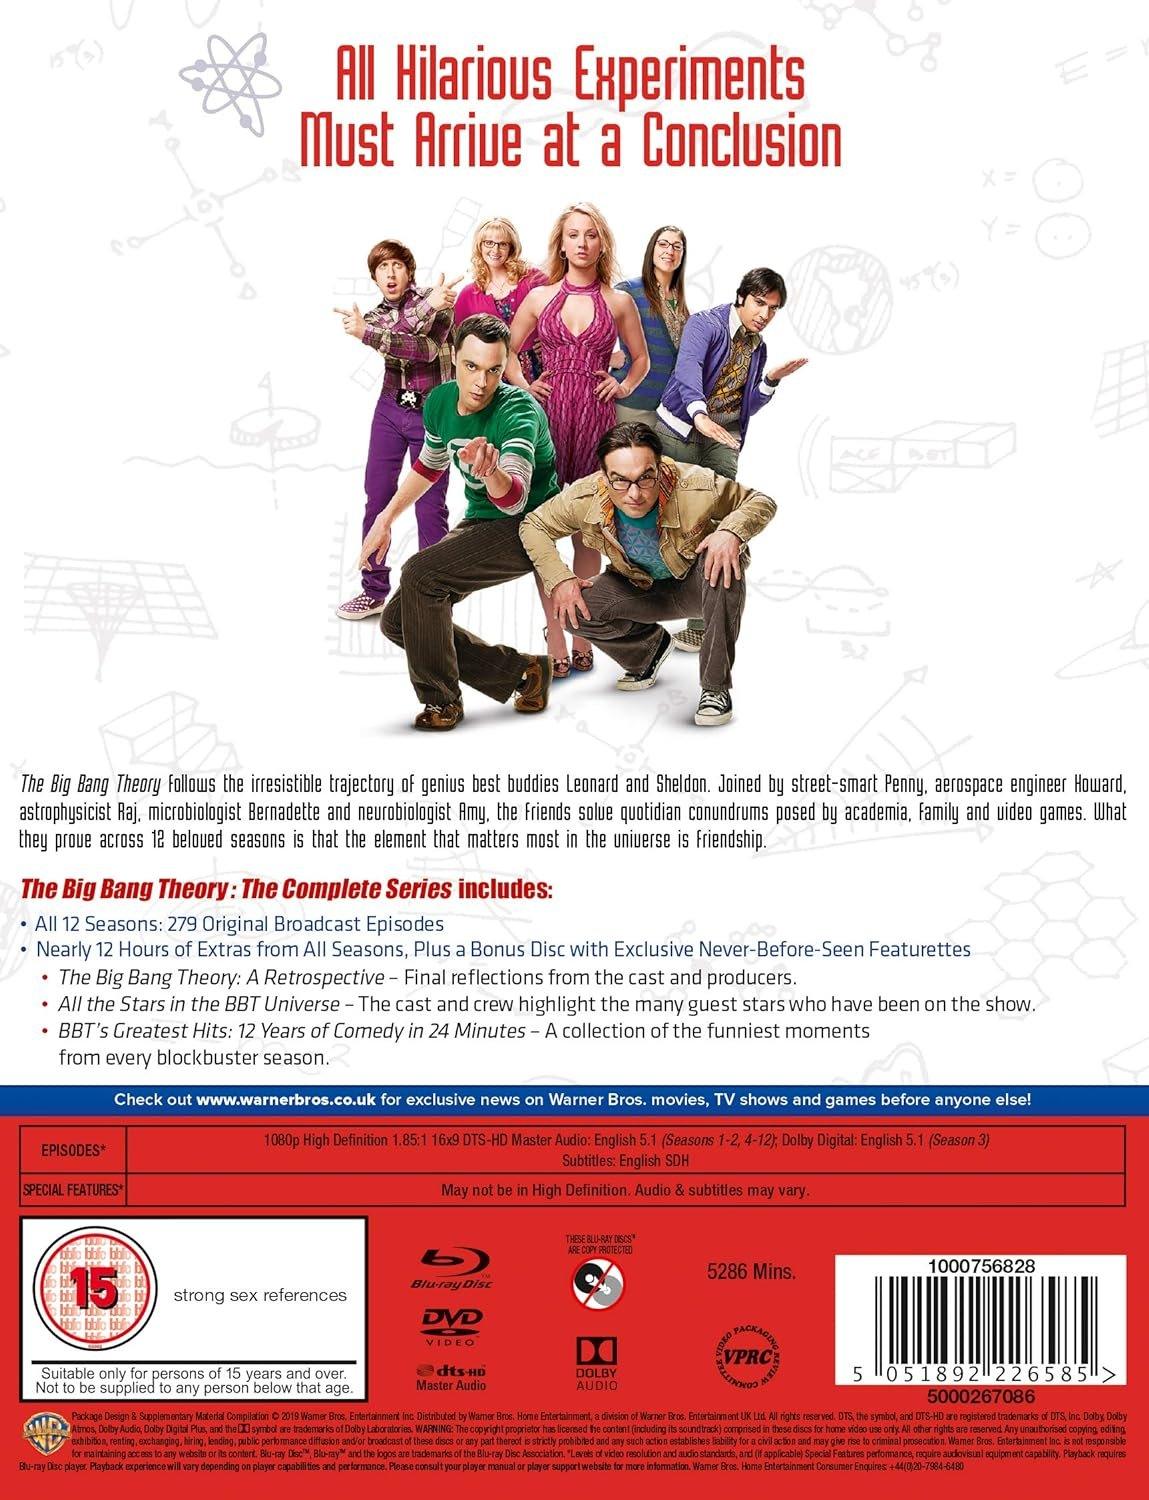 The Big Bang Theory S1-12 [Blu-ray, Region Free, Worldwide] - ZXASQW Funny Name. Free Shipping.